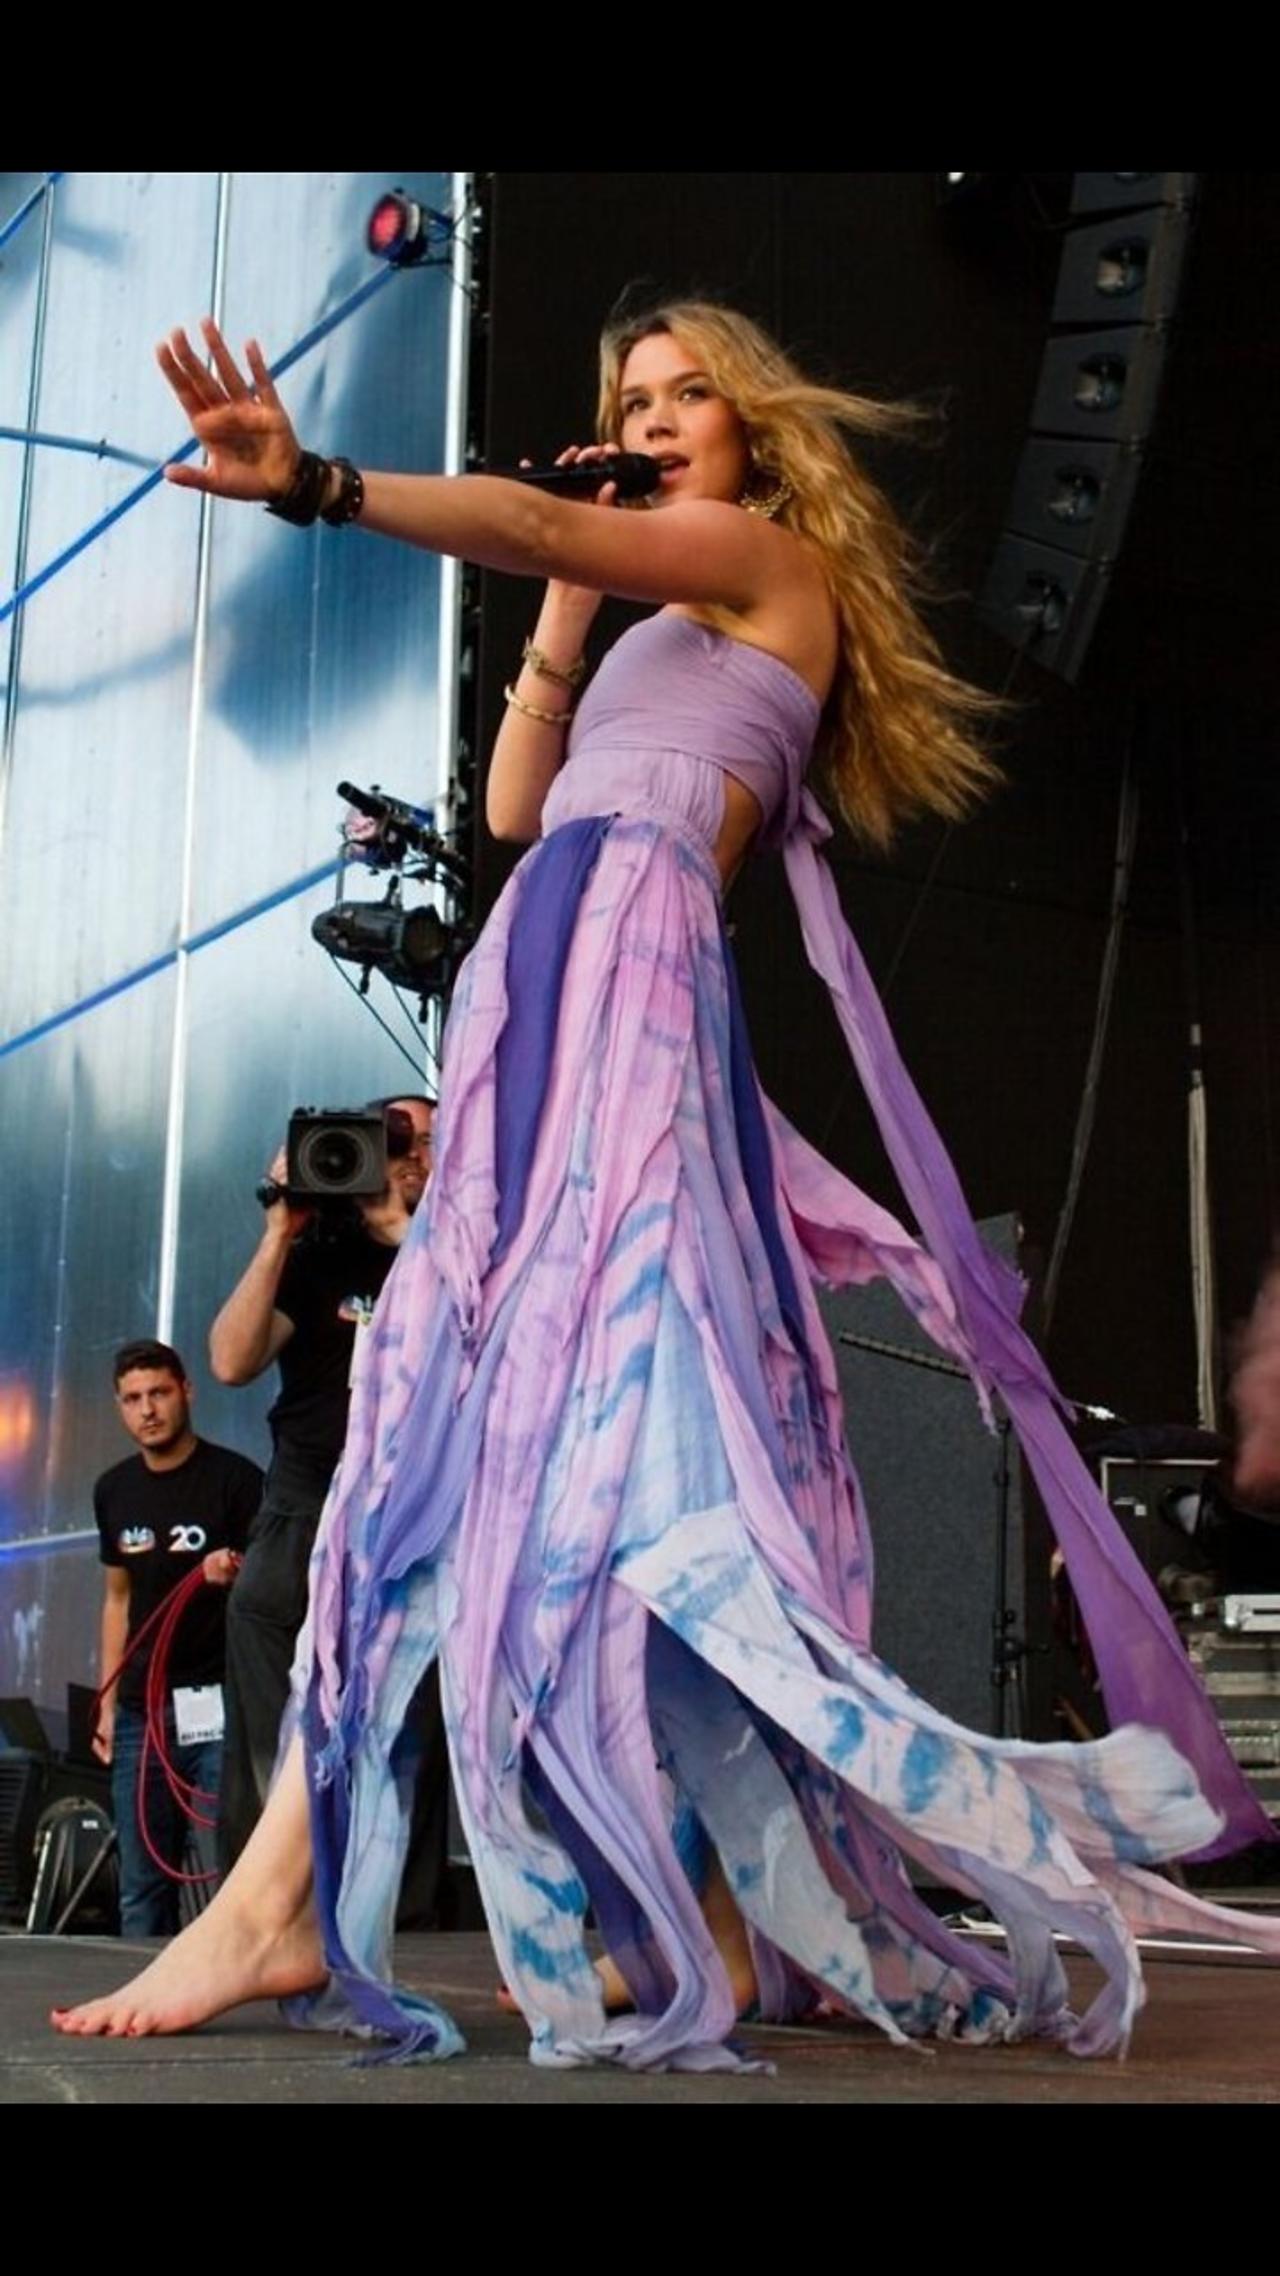 JOSS STONE ENGLISH SINGER & SONGWRITER, IS AN ISRAELITE FOREIGNER CONFUSION OF FACE GENTLE.